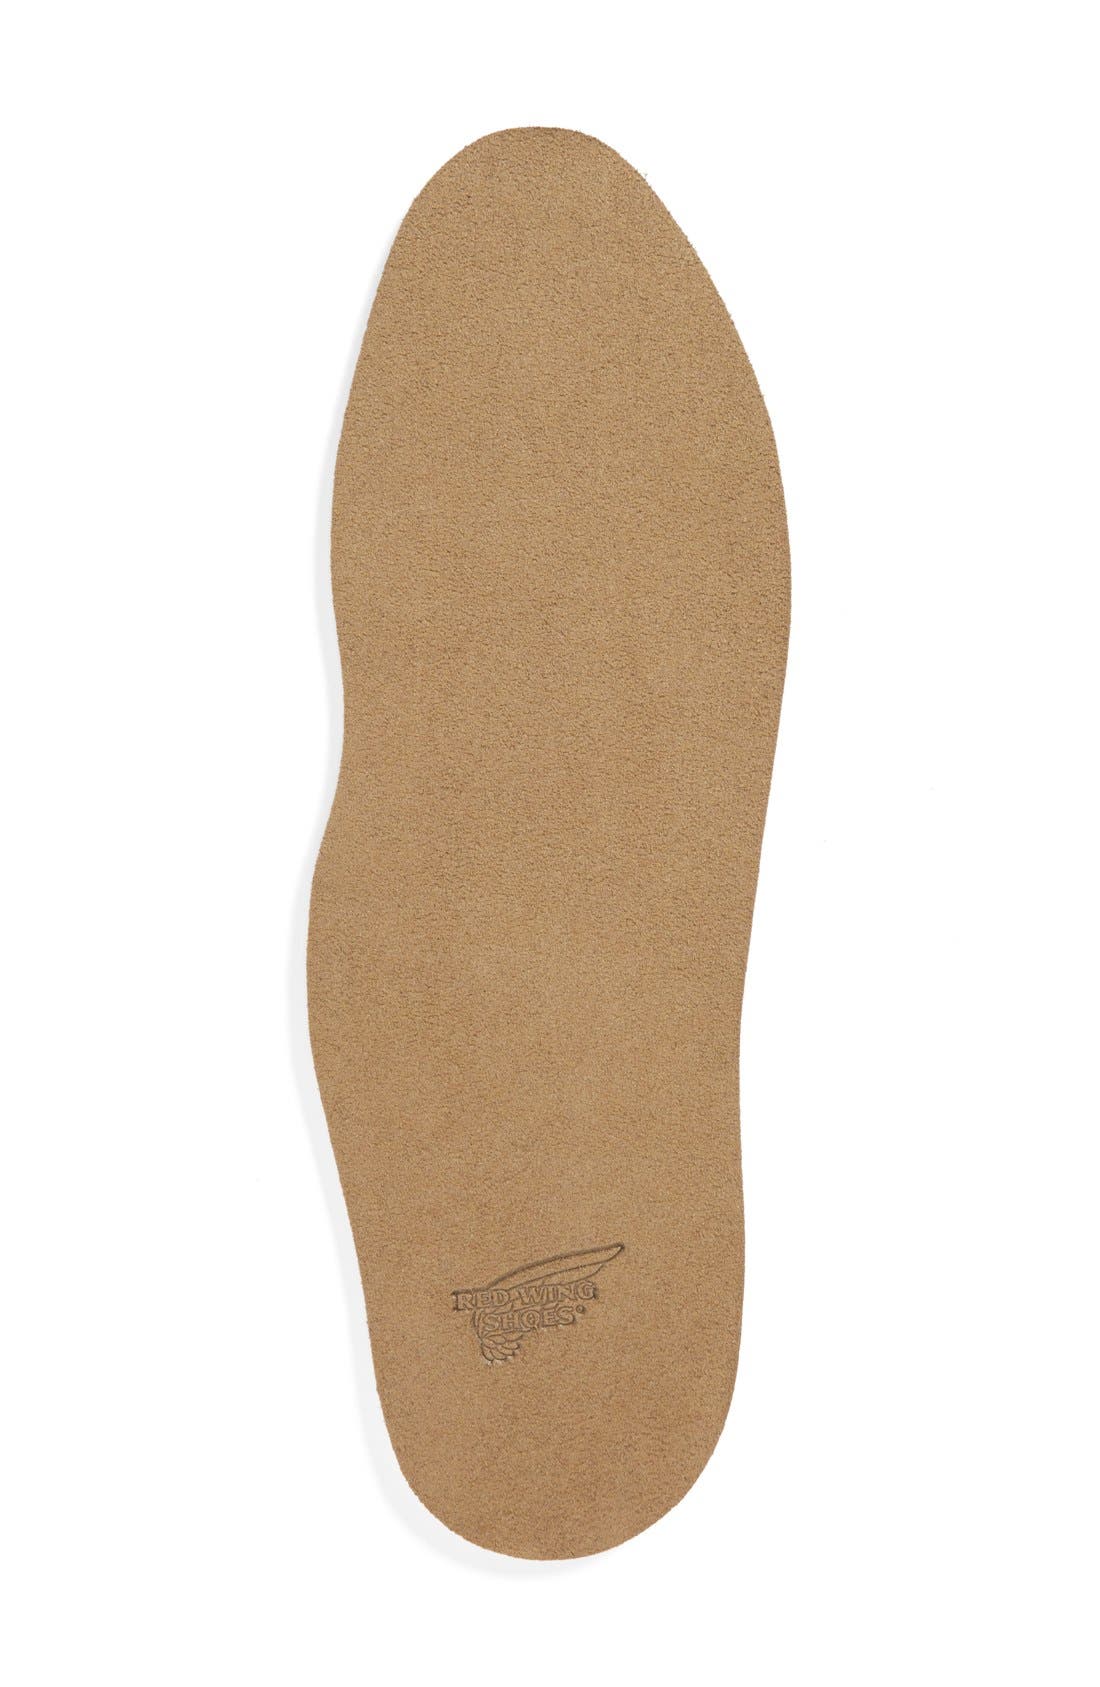 poron insoles red wing